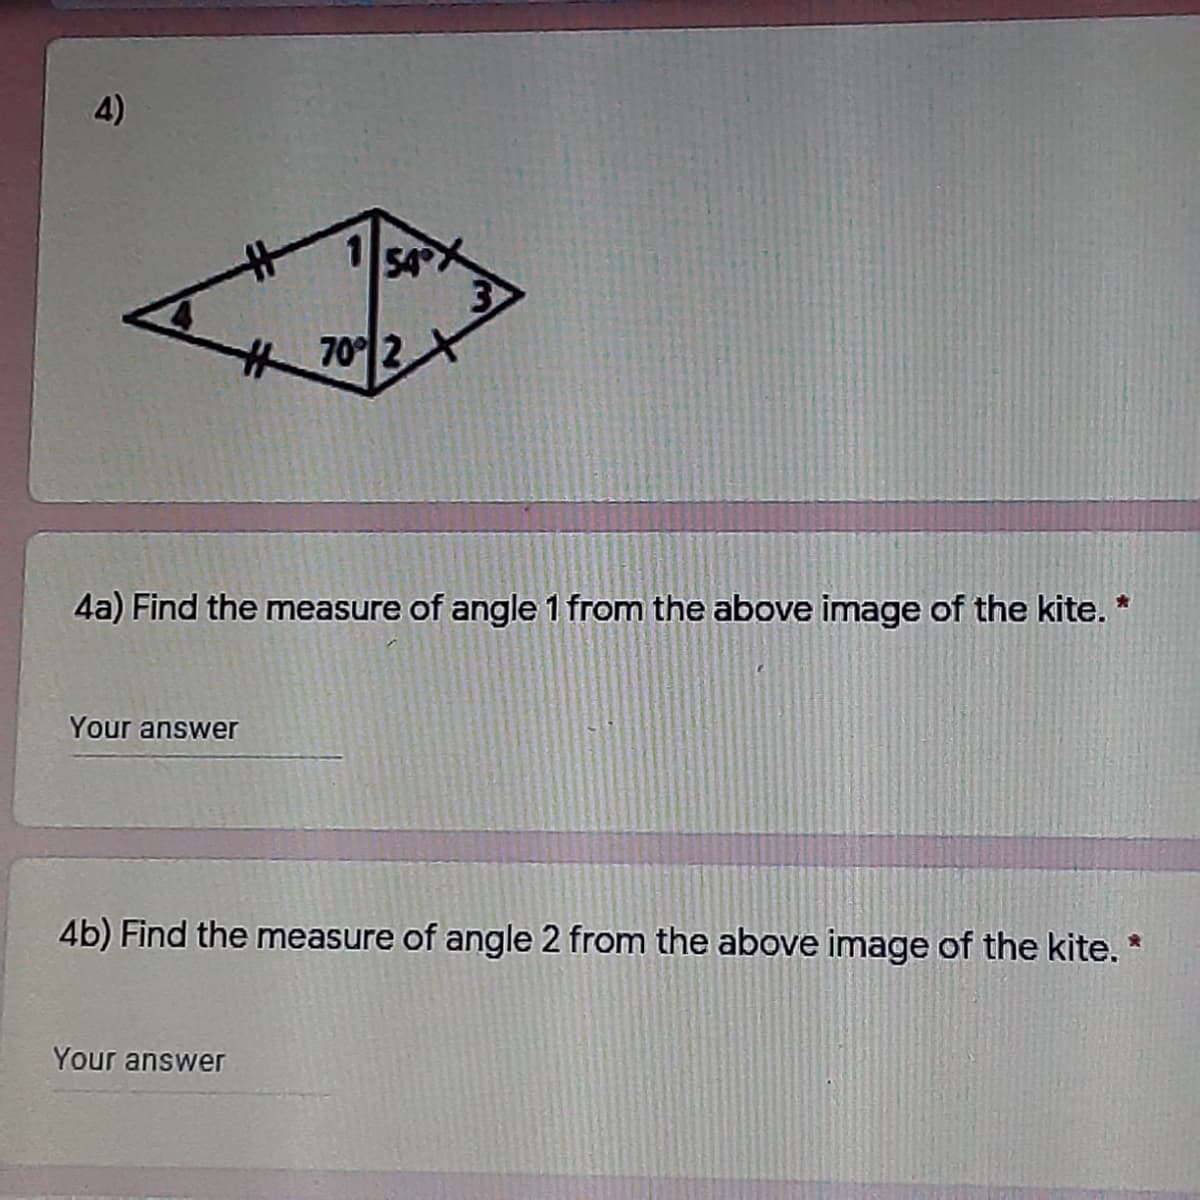 4)
1
54X
70 2X
4a) Find the measure of angle 1 from the above image of the kite. *
Your answer
4b) Find the measure of angle 2 from the above image of the kite.
Your answer
